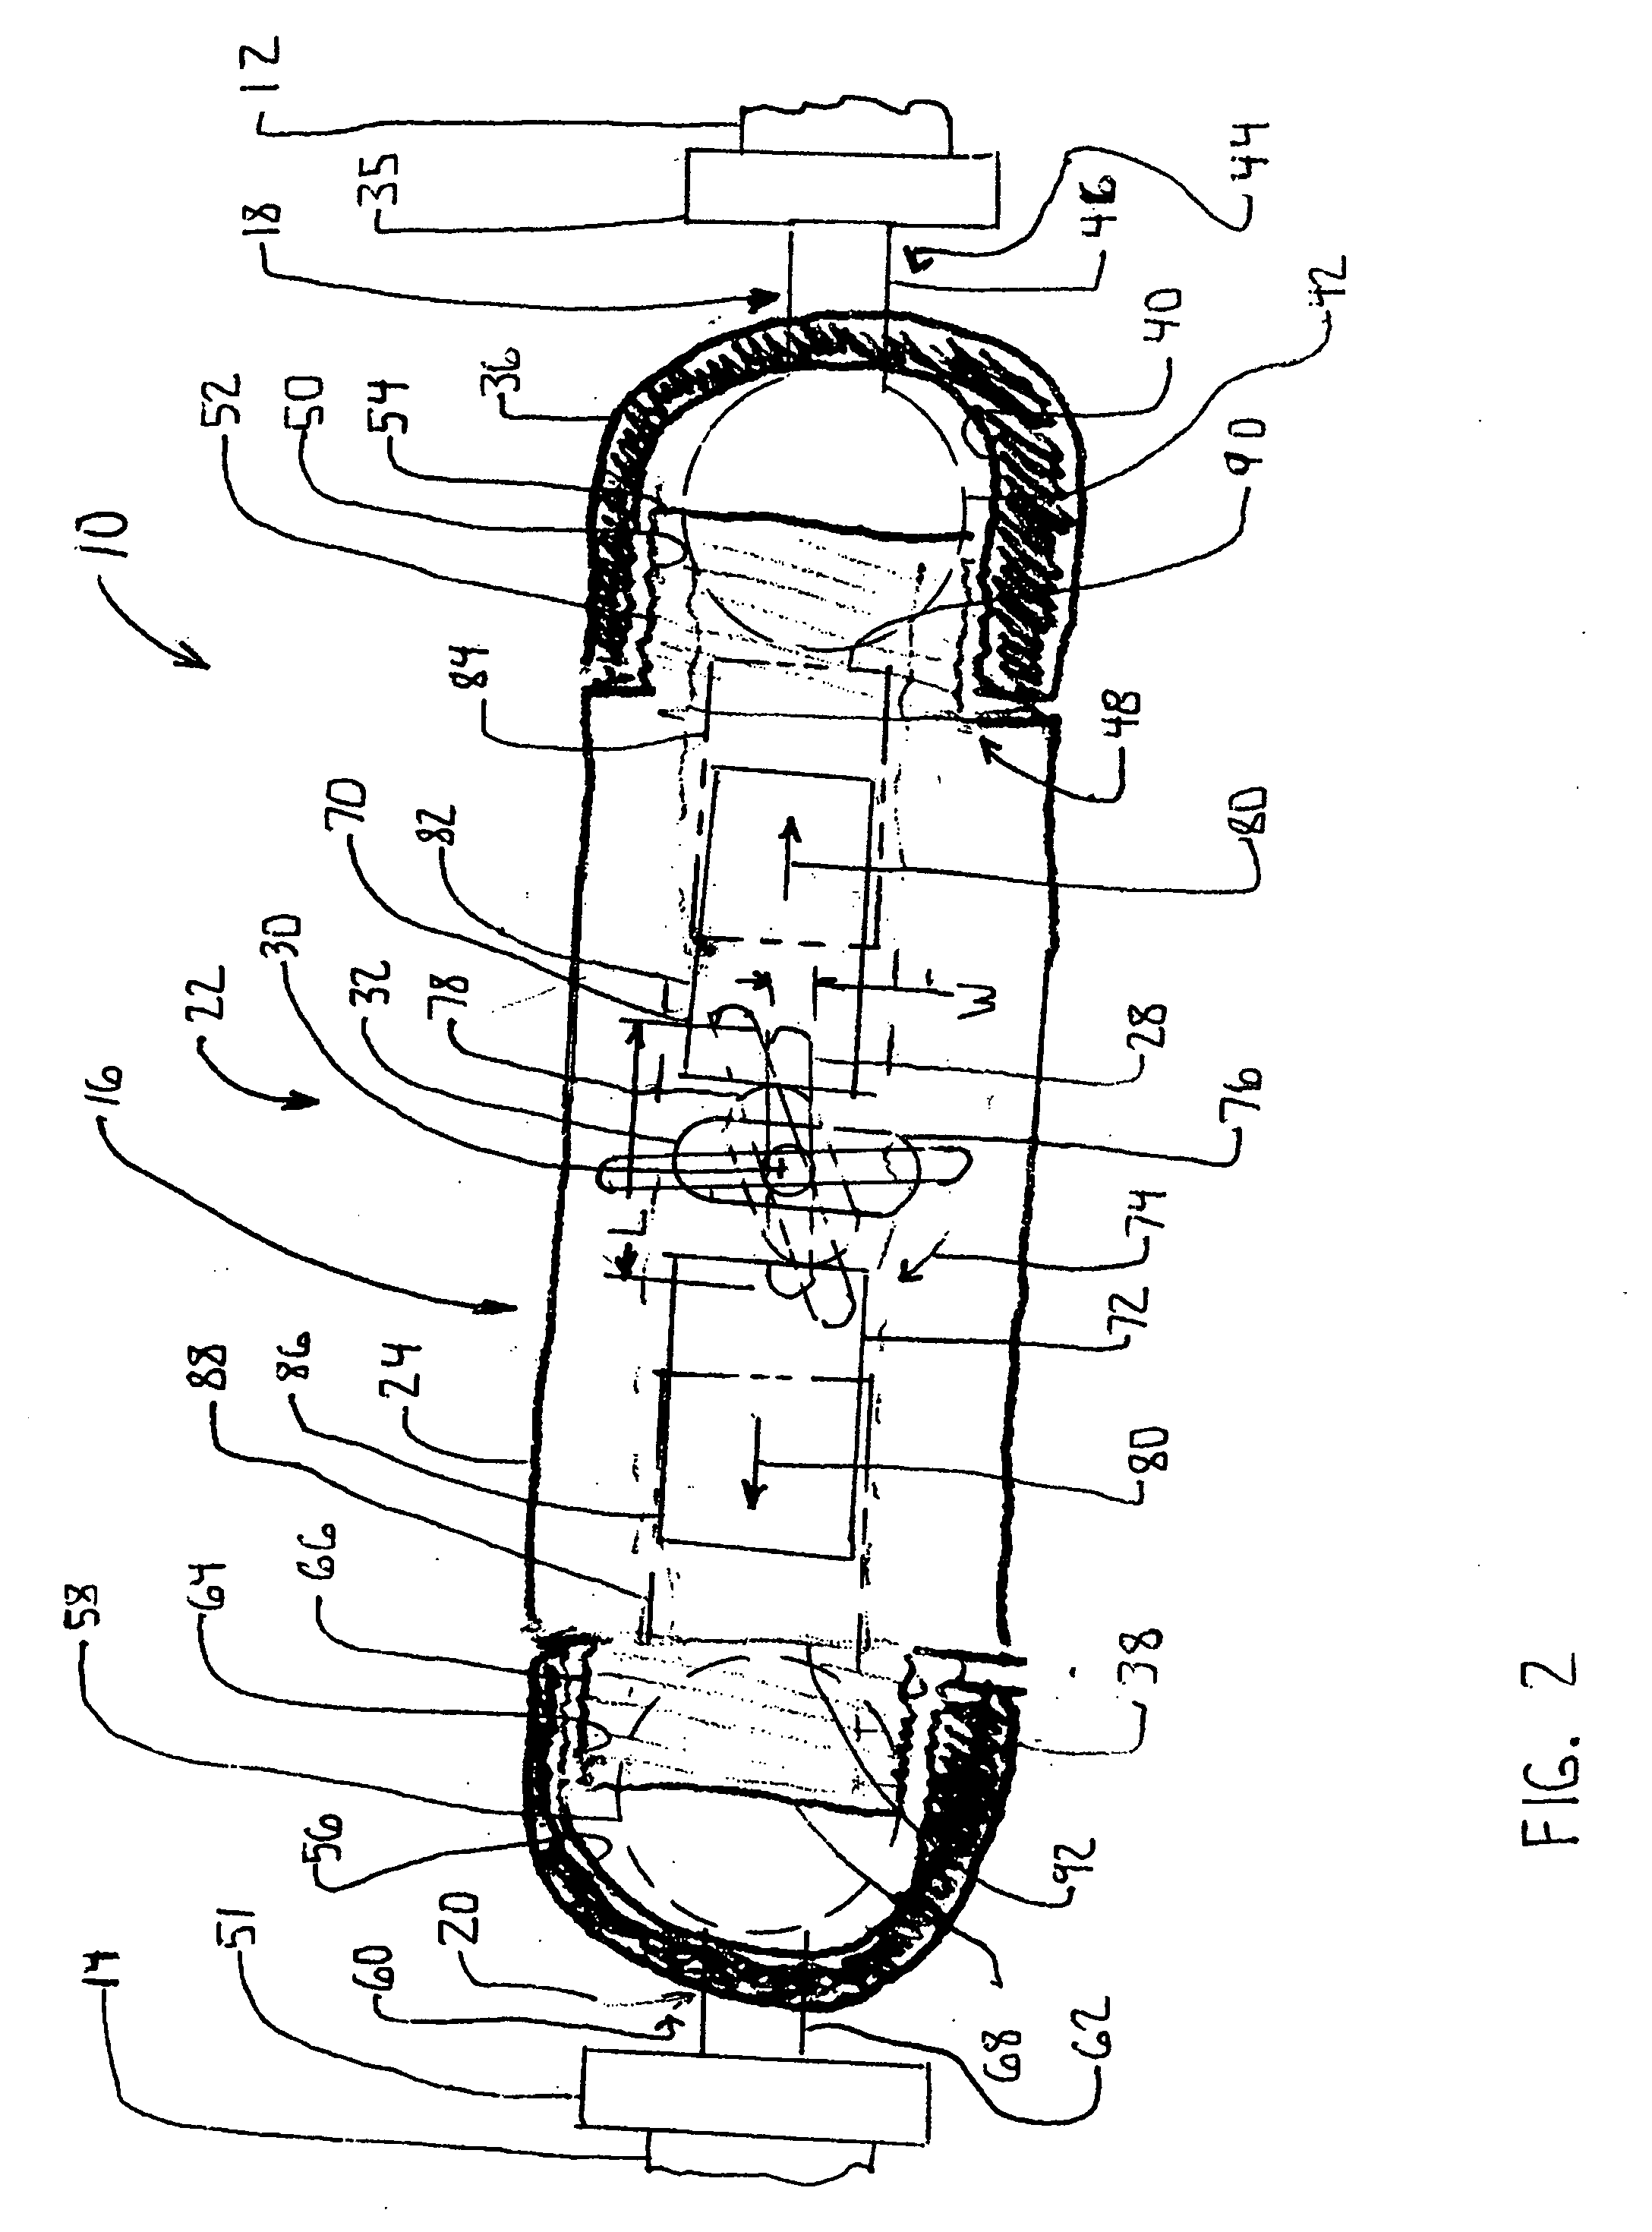 Orthopaedic joint, device and associated method